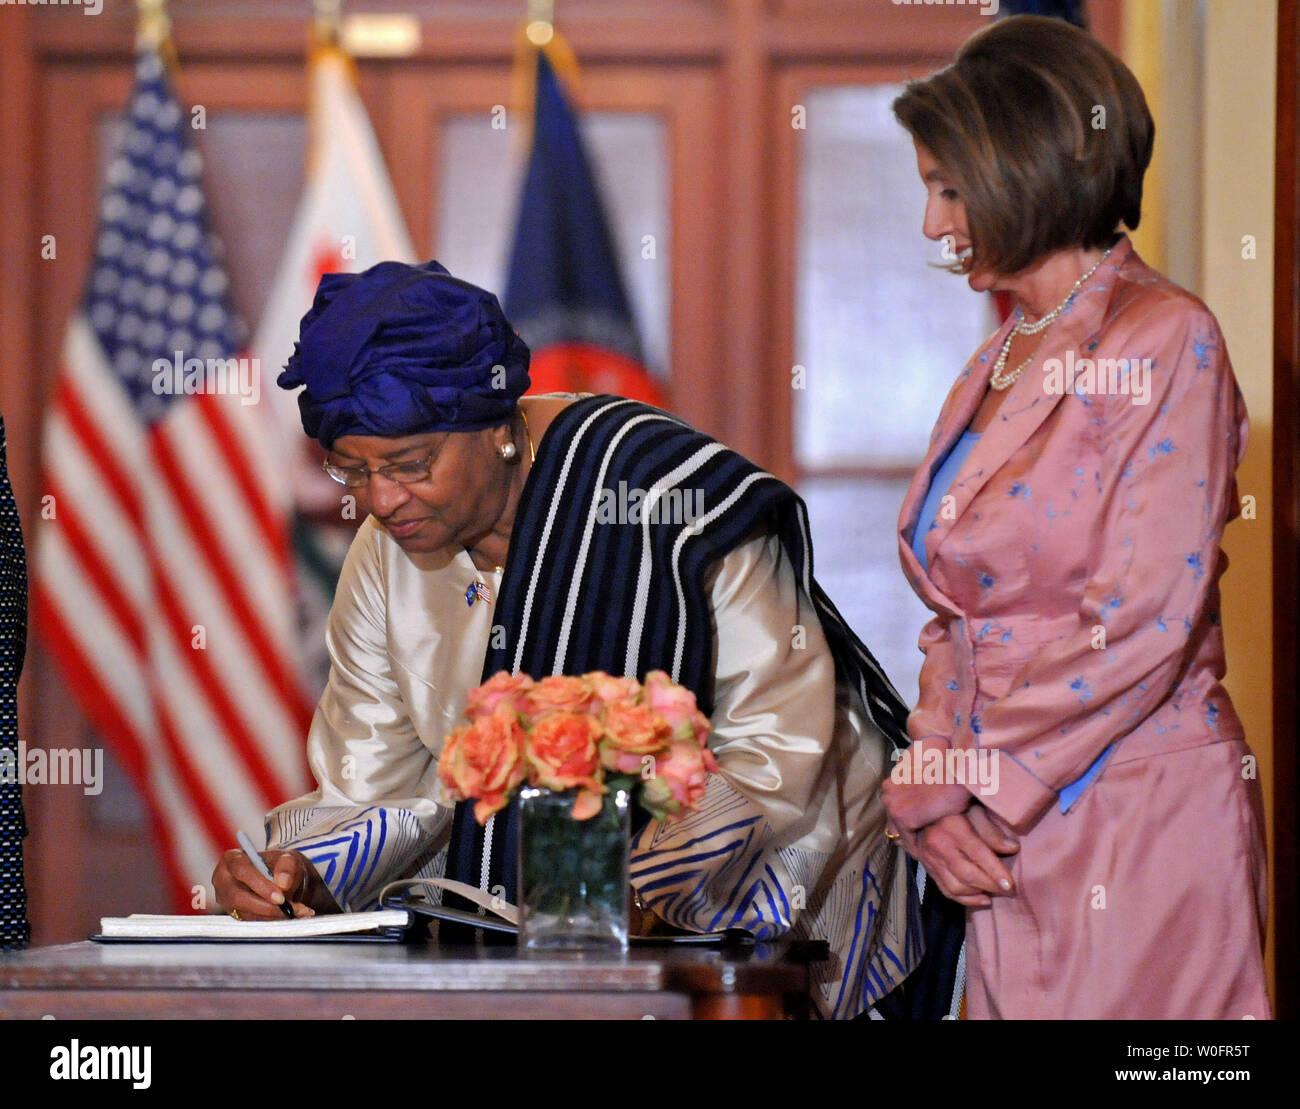 Liberian President Ellen Johnson Sirleaf (L) signs a guest book as Speaker of the House Nancy Pelosi (D-CA) stands by prior to a meeting in the U.S. Capitol Building in Washington on May 25, 2010.  UPI/Kevin Dietsch Stock Photo